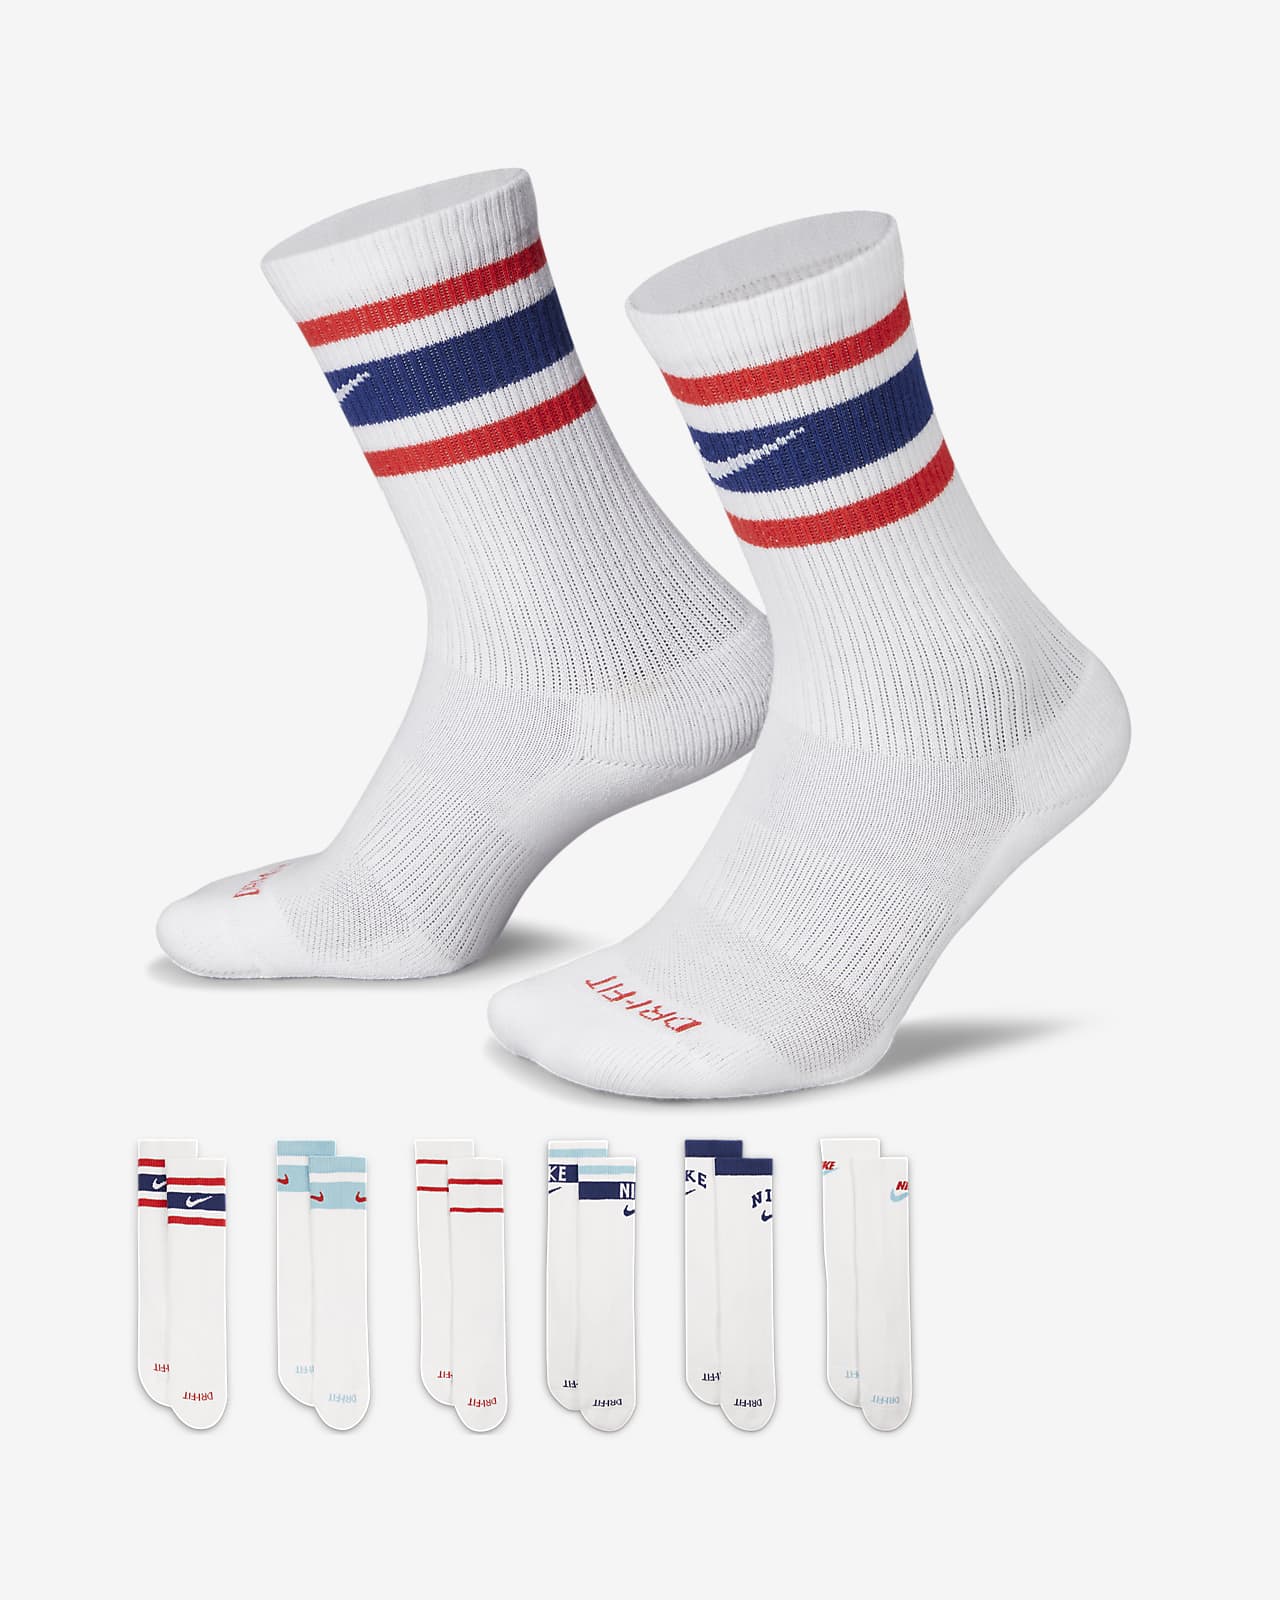 Chaussettes mi-mollet Nike Everyday Plus Cushioned (6 paires)